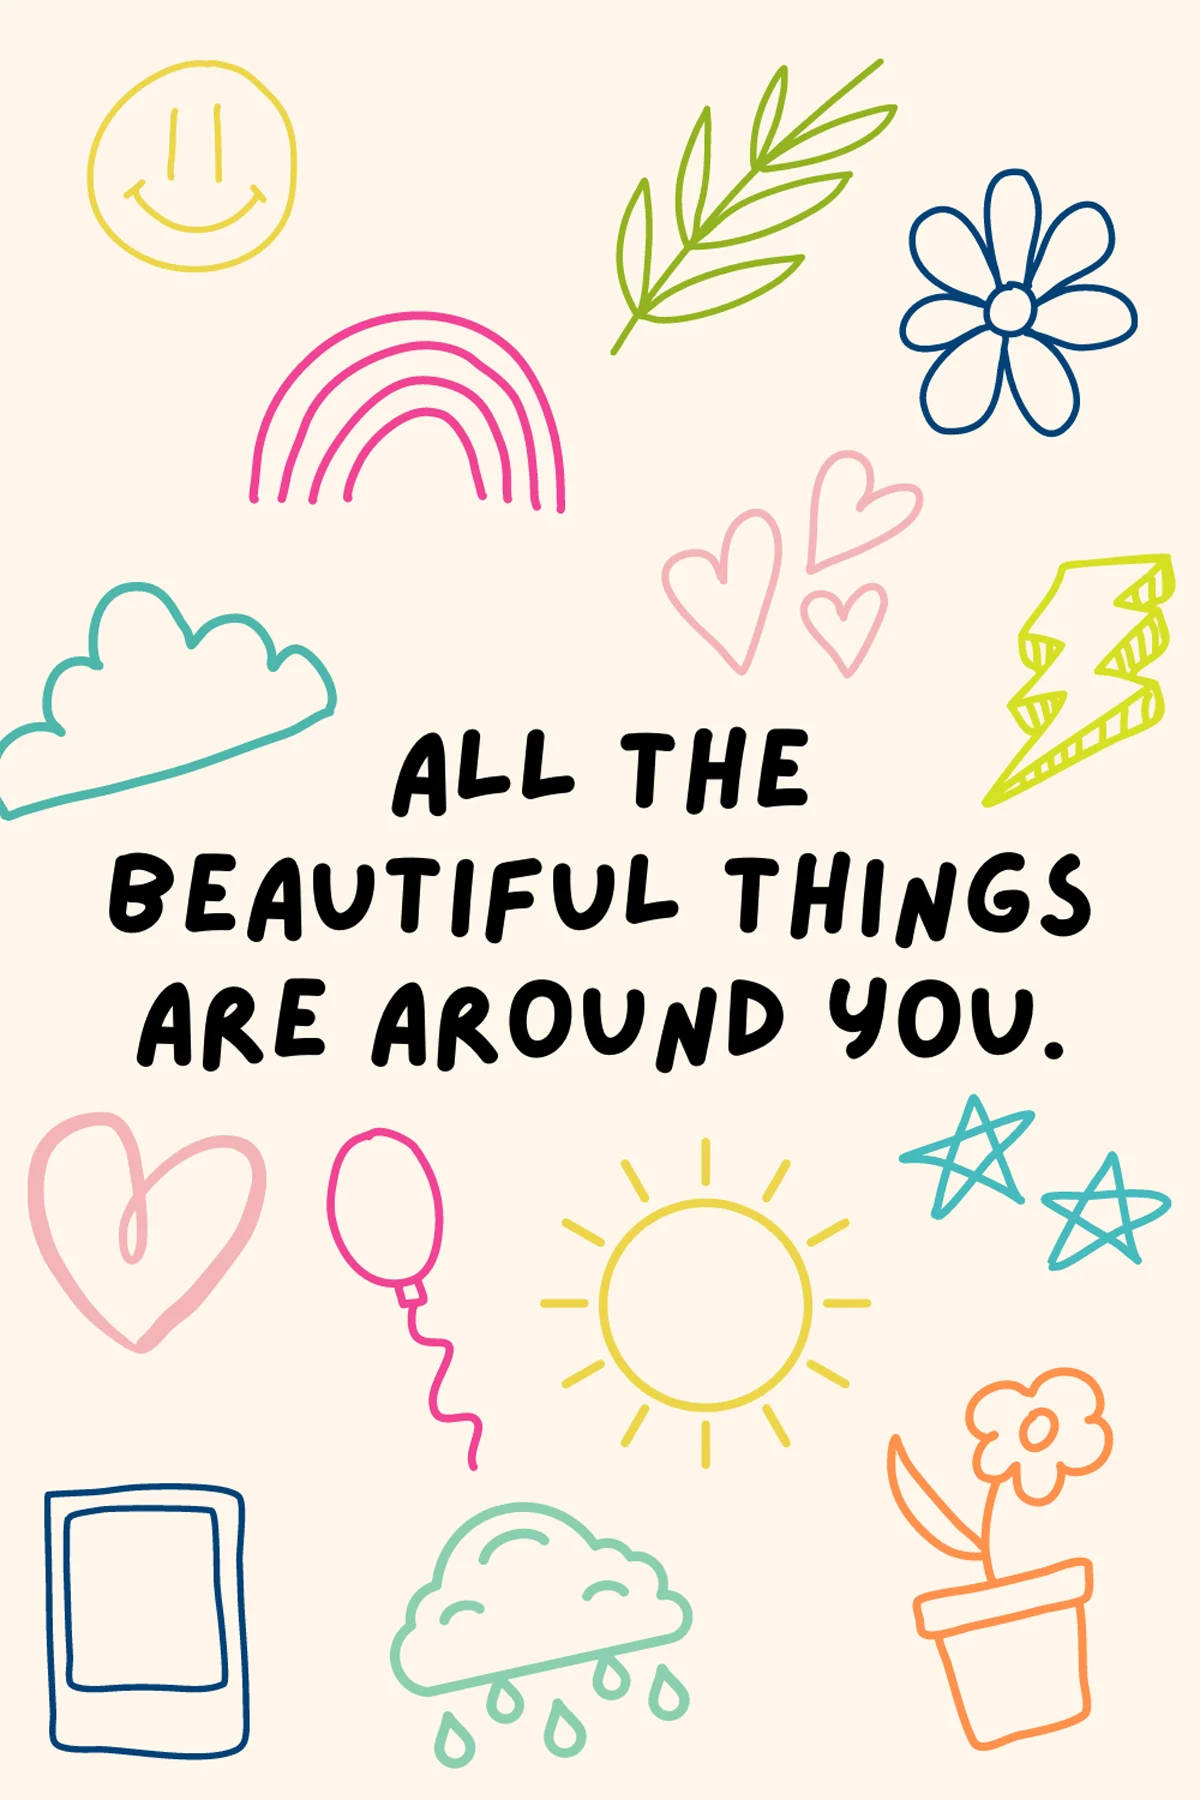 Download Motivational Quotes Aesthetic Beautiful Things Wallpaper |  